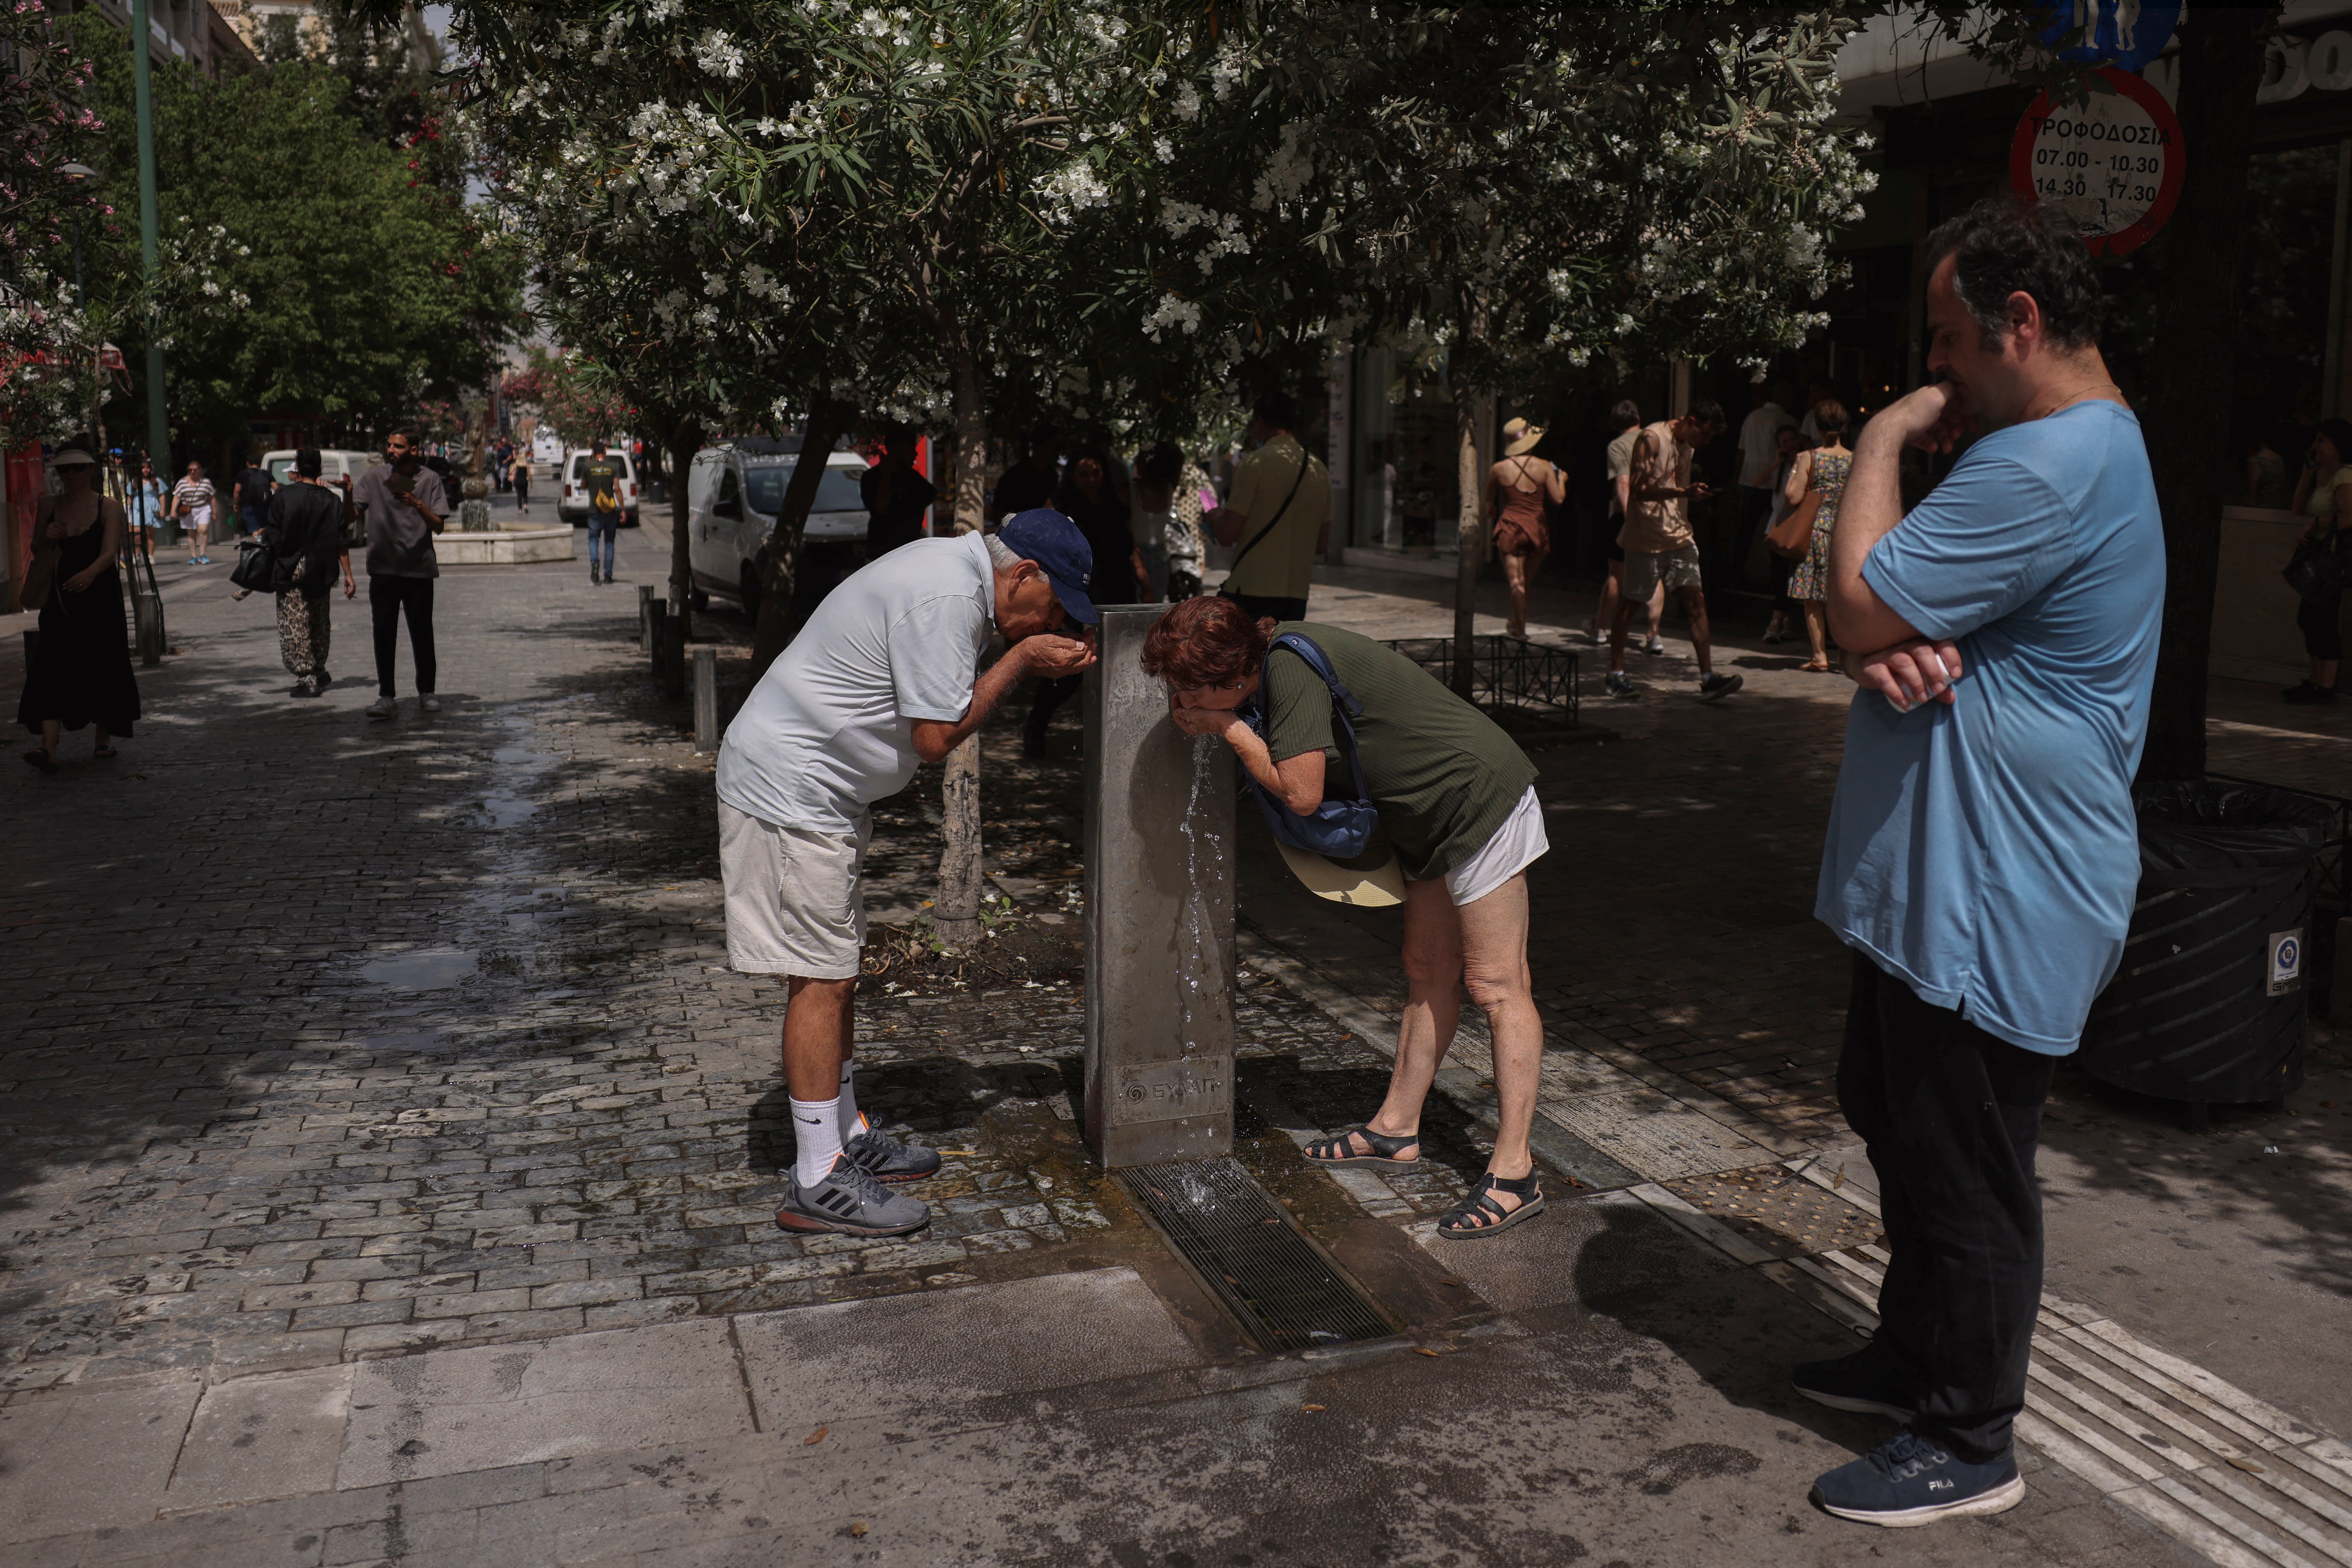 People drinking from water fountains in intense heat in Greece